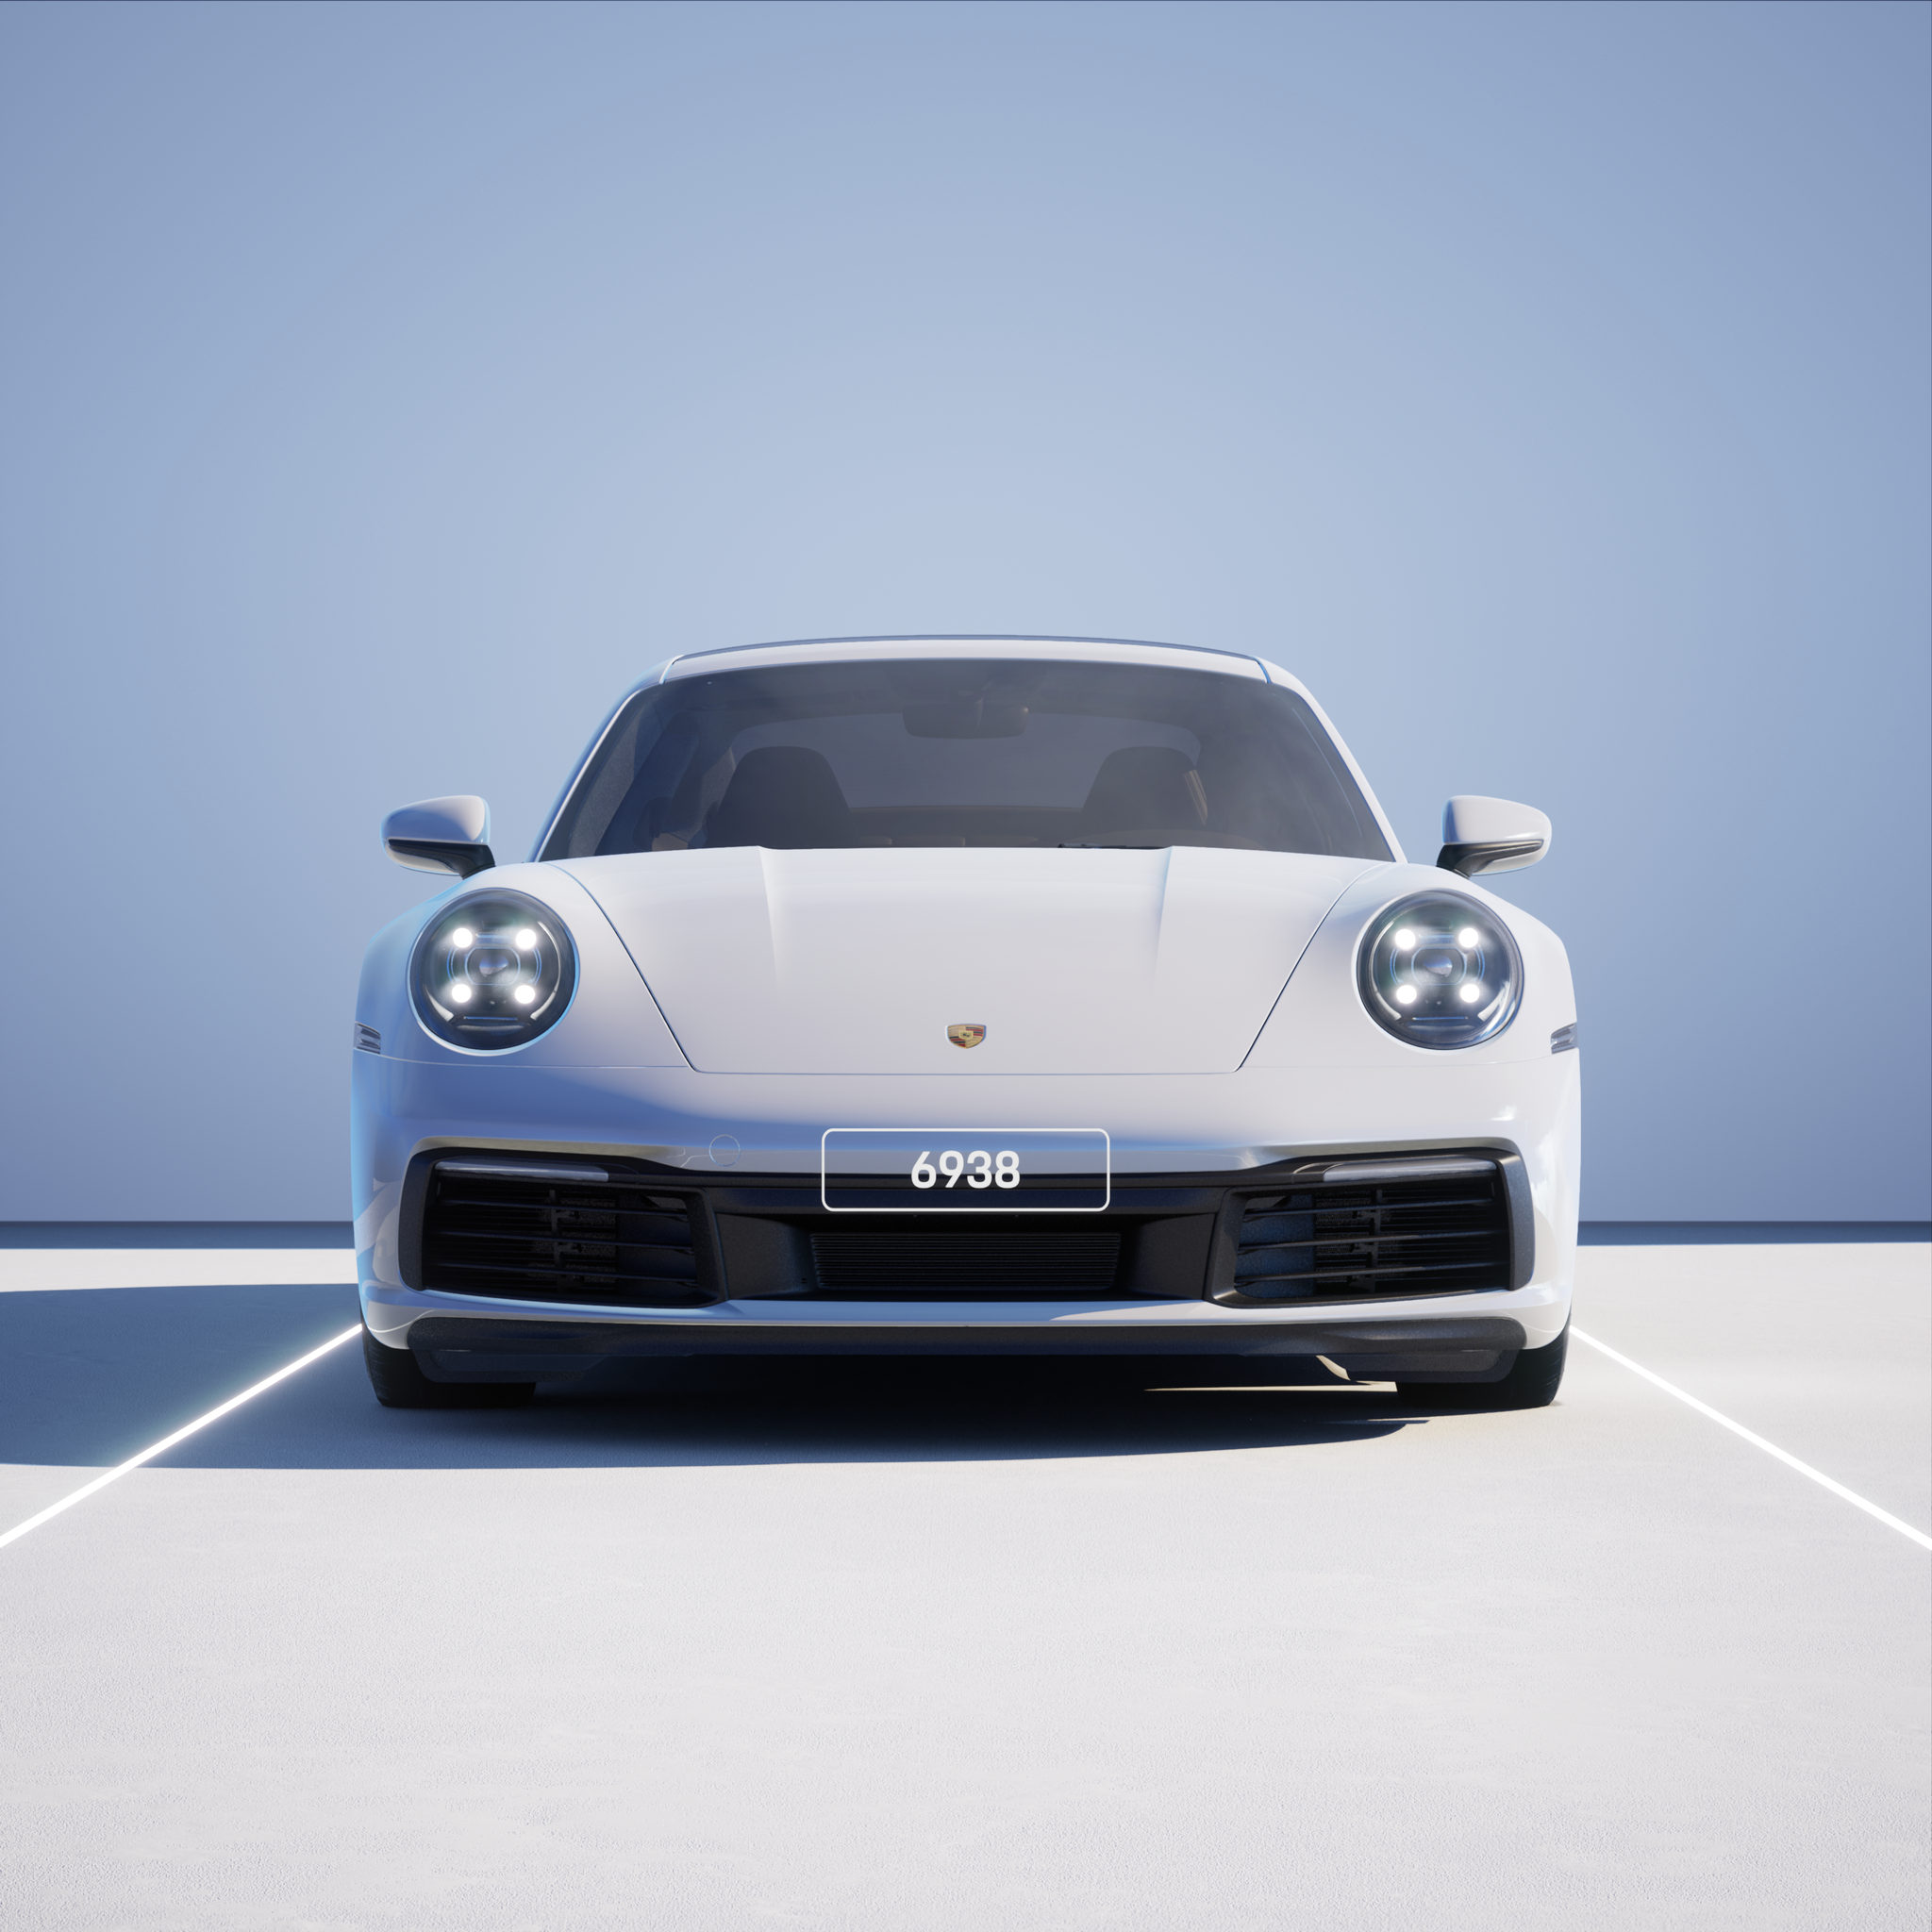 The PORSCHΞ 911 6938 image in phase